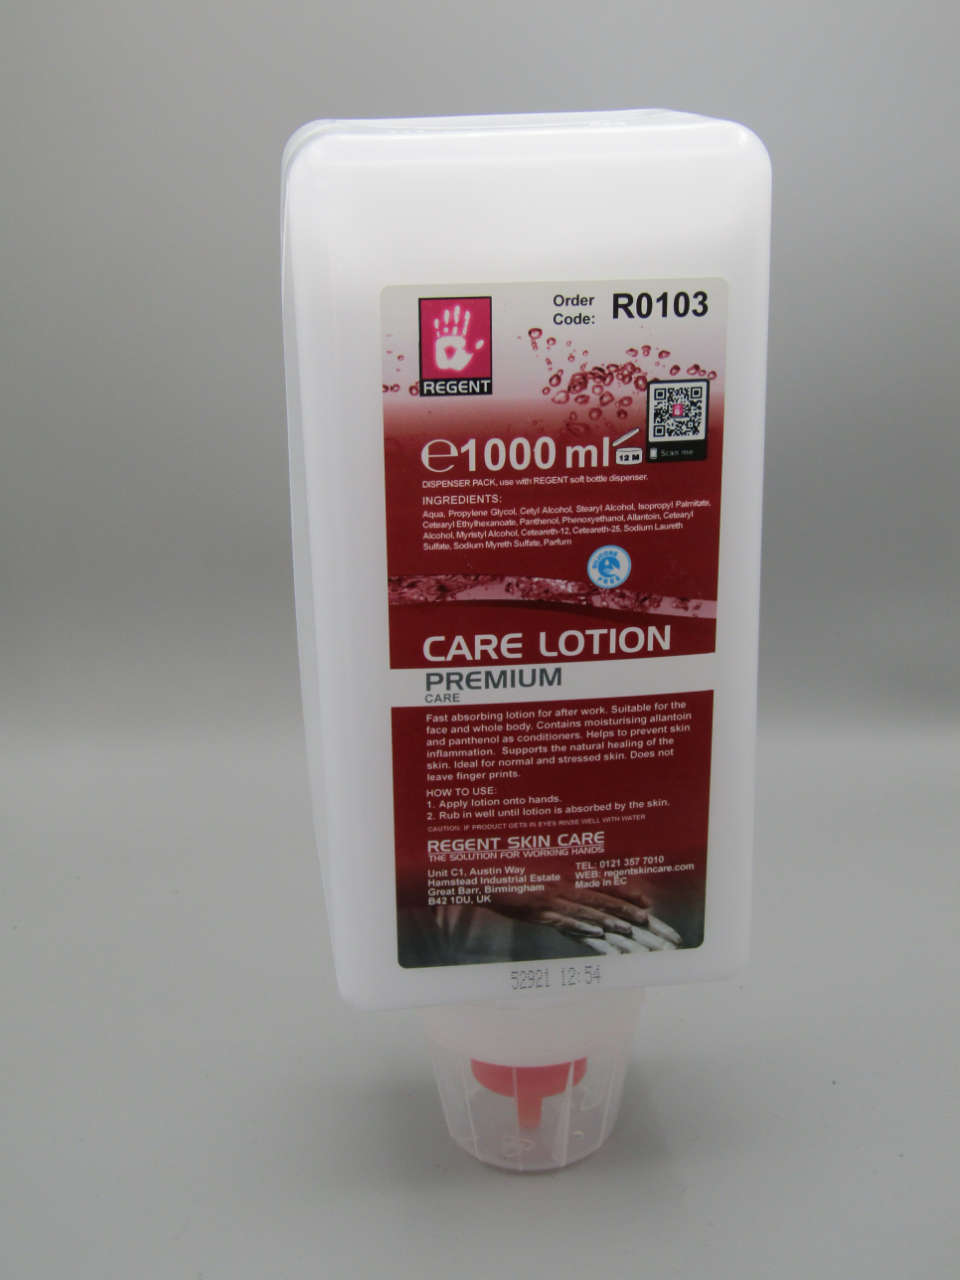 Photo of Care Lotion bottle